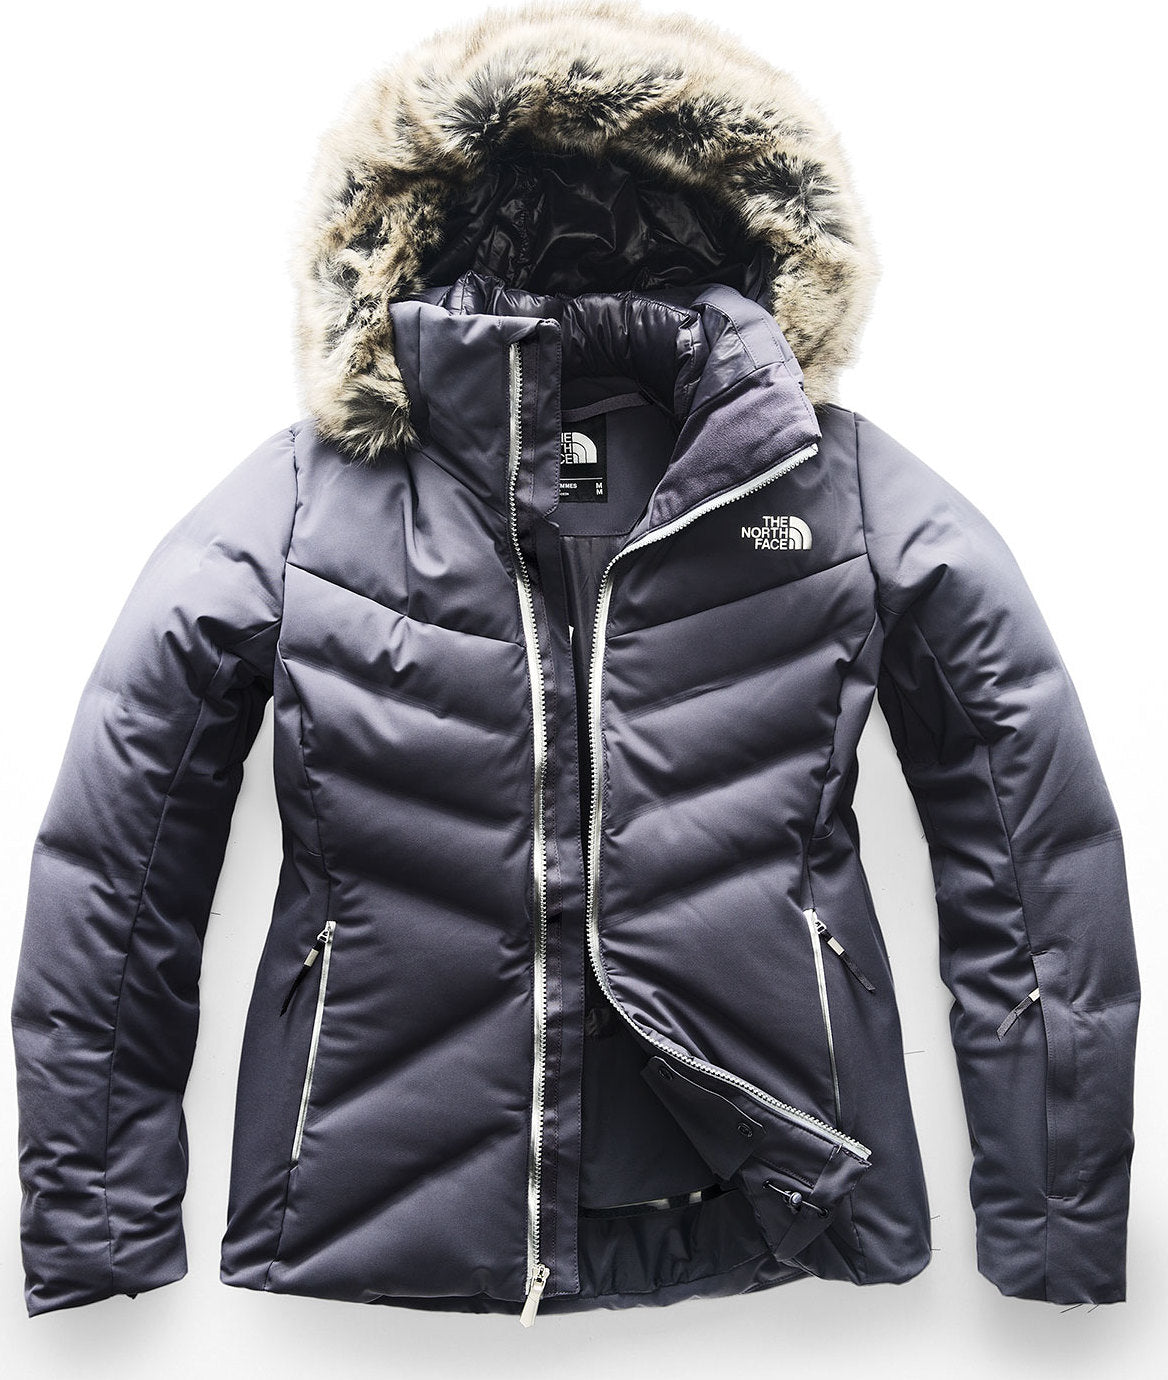 The North Face Cirque Down Jacket 